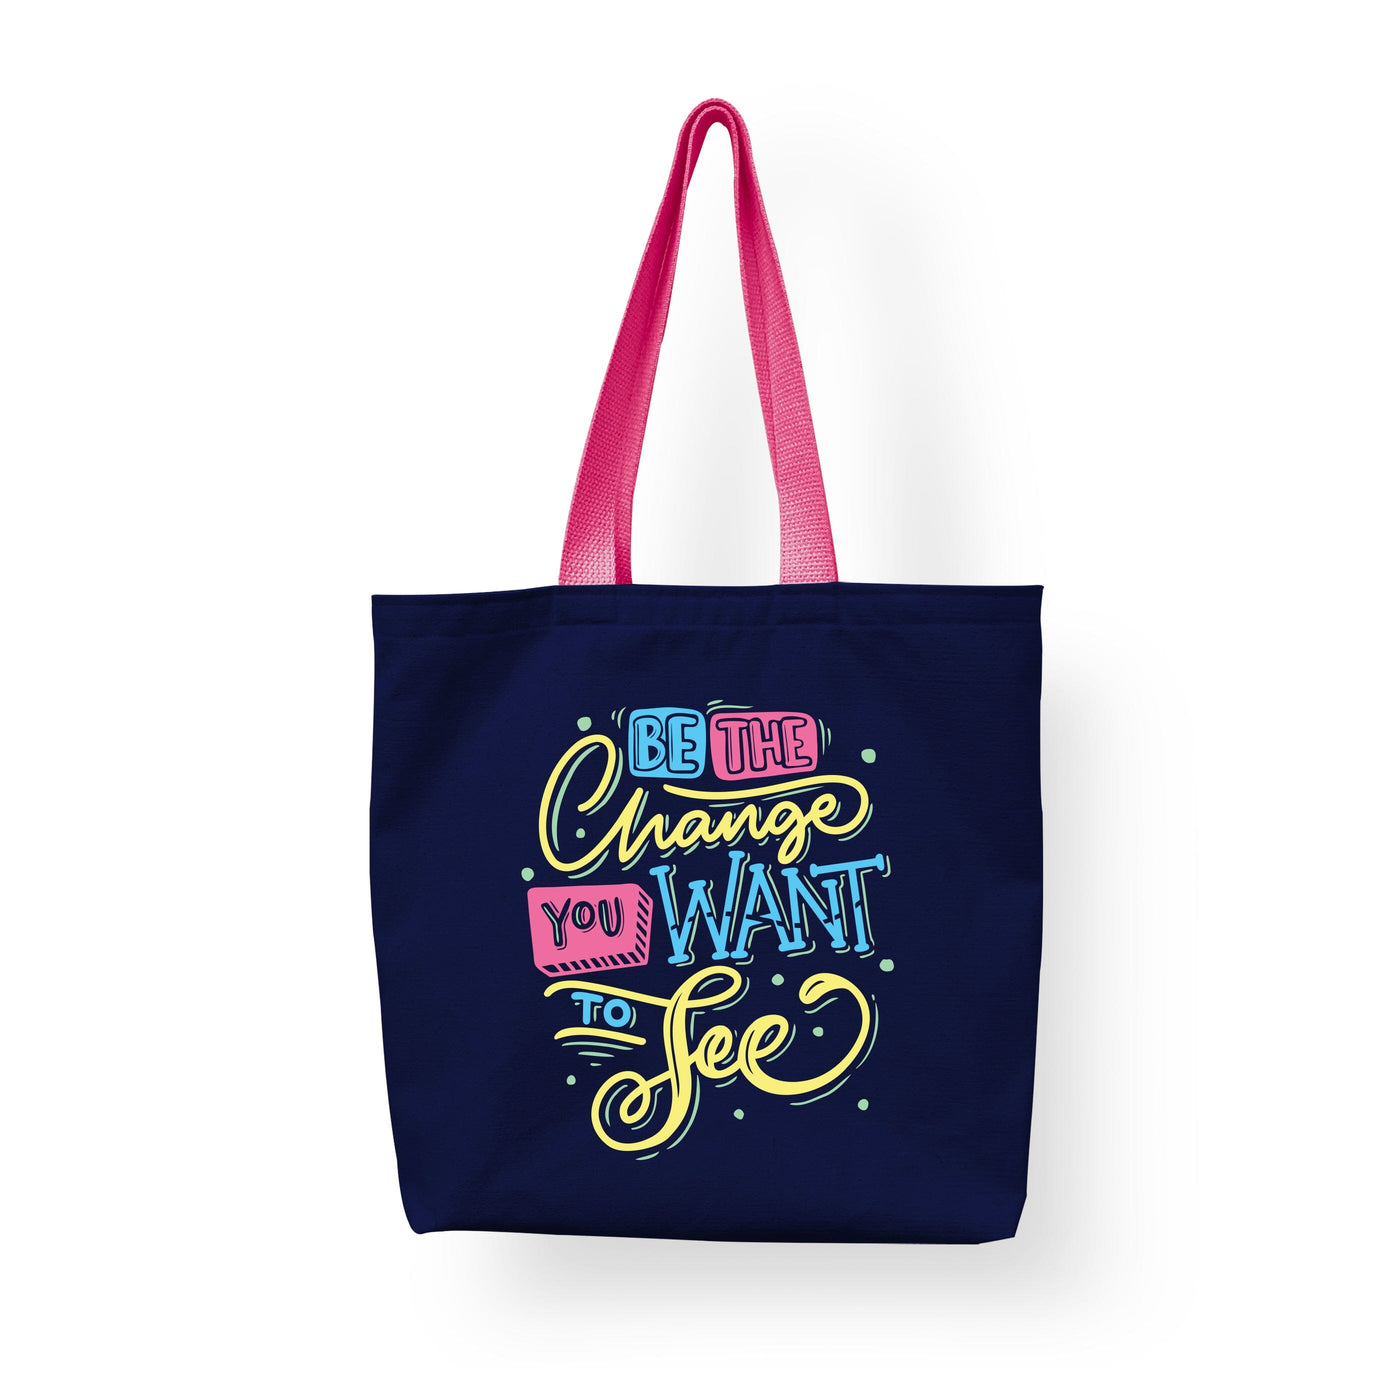 Be The Change You Want to See - Cotton Shopping Tote Bag for Eco-Friendly Shoppers, Teacher Bag, Reusable Tote Bag | Sam and Zoey Fashion Tote Apparel & Accessories Sam + Zoey  Sam + Zoey